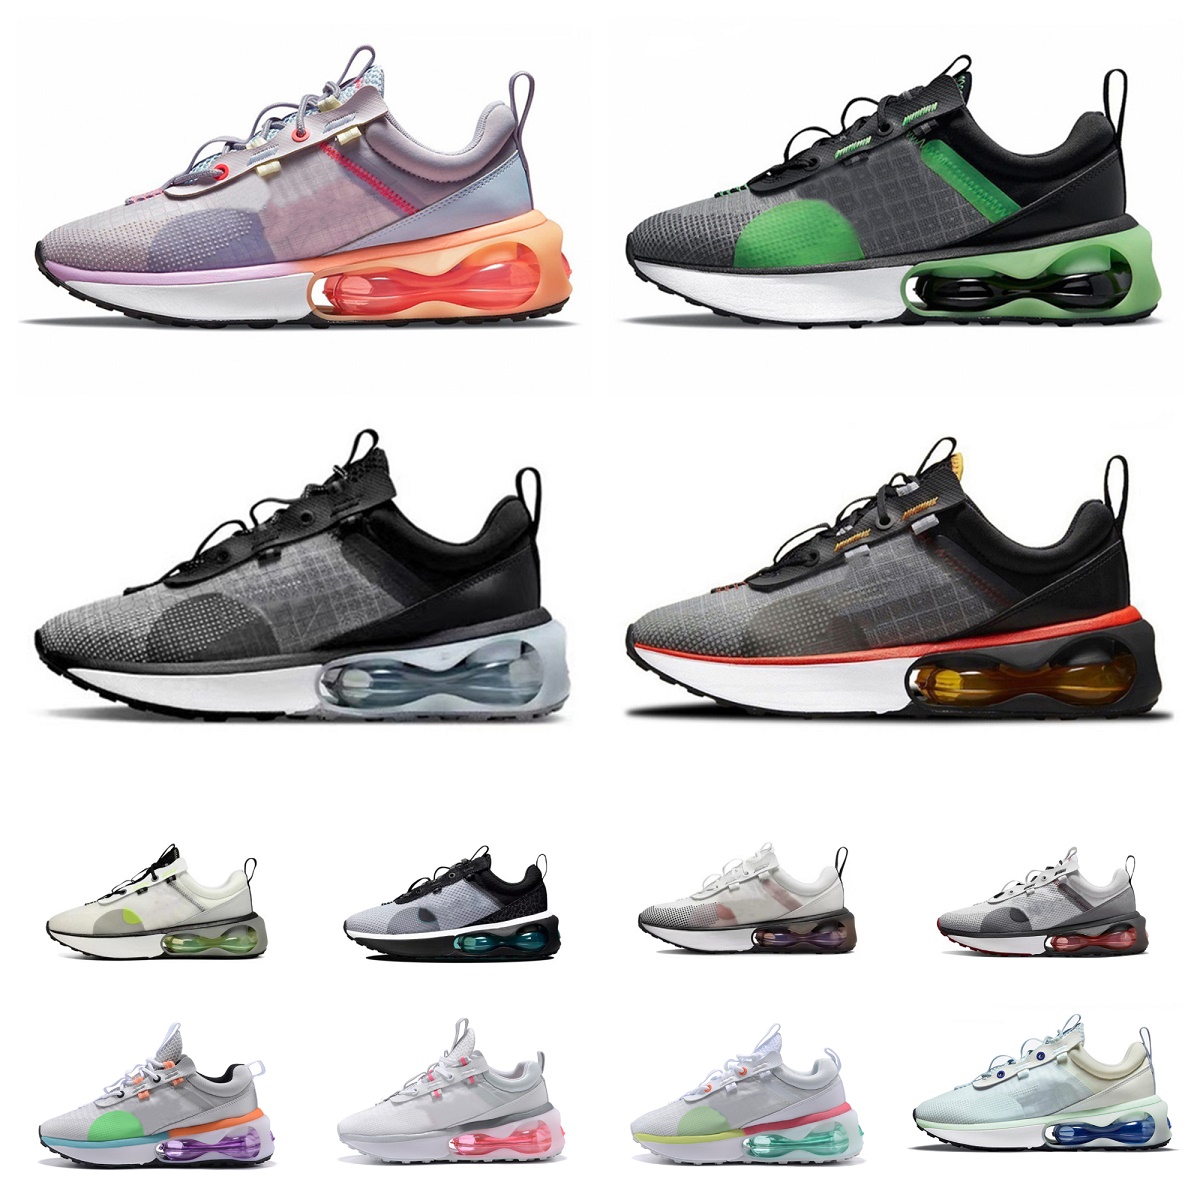 

Knit Mesh Max 2021 GS Running shoes men women airmaxs Obsidian Triple Black Mystic Red Smoke Grey Ashen Slate Barely Green White Bright Crimson Volt Dark Teal trainers, Bubble package bag